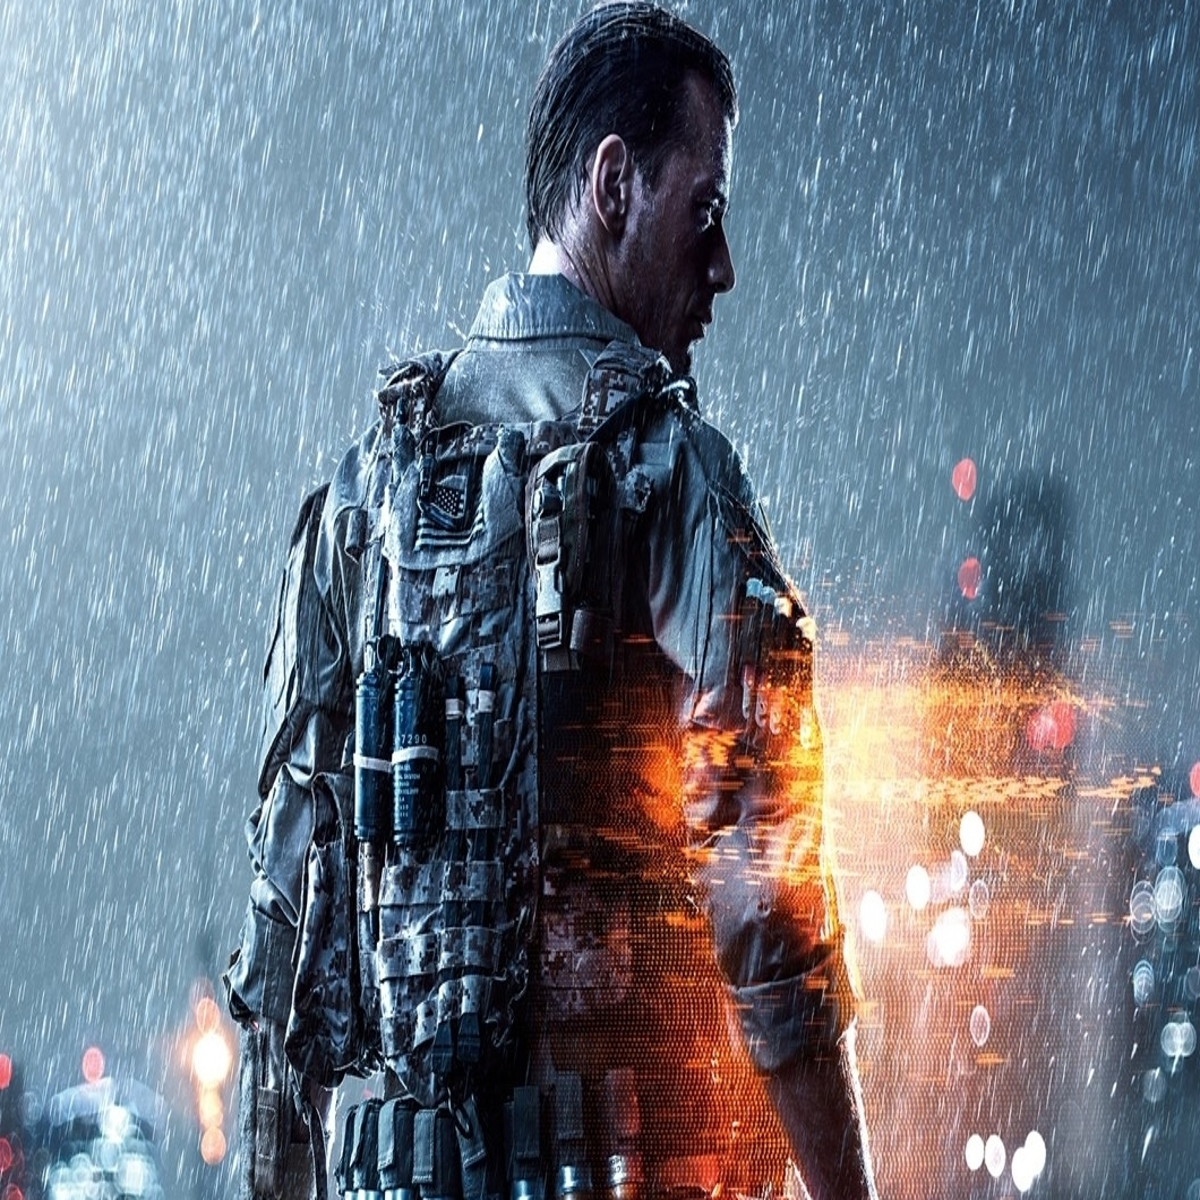 Battlefield 4 for Sony PS4 